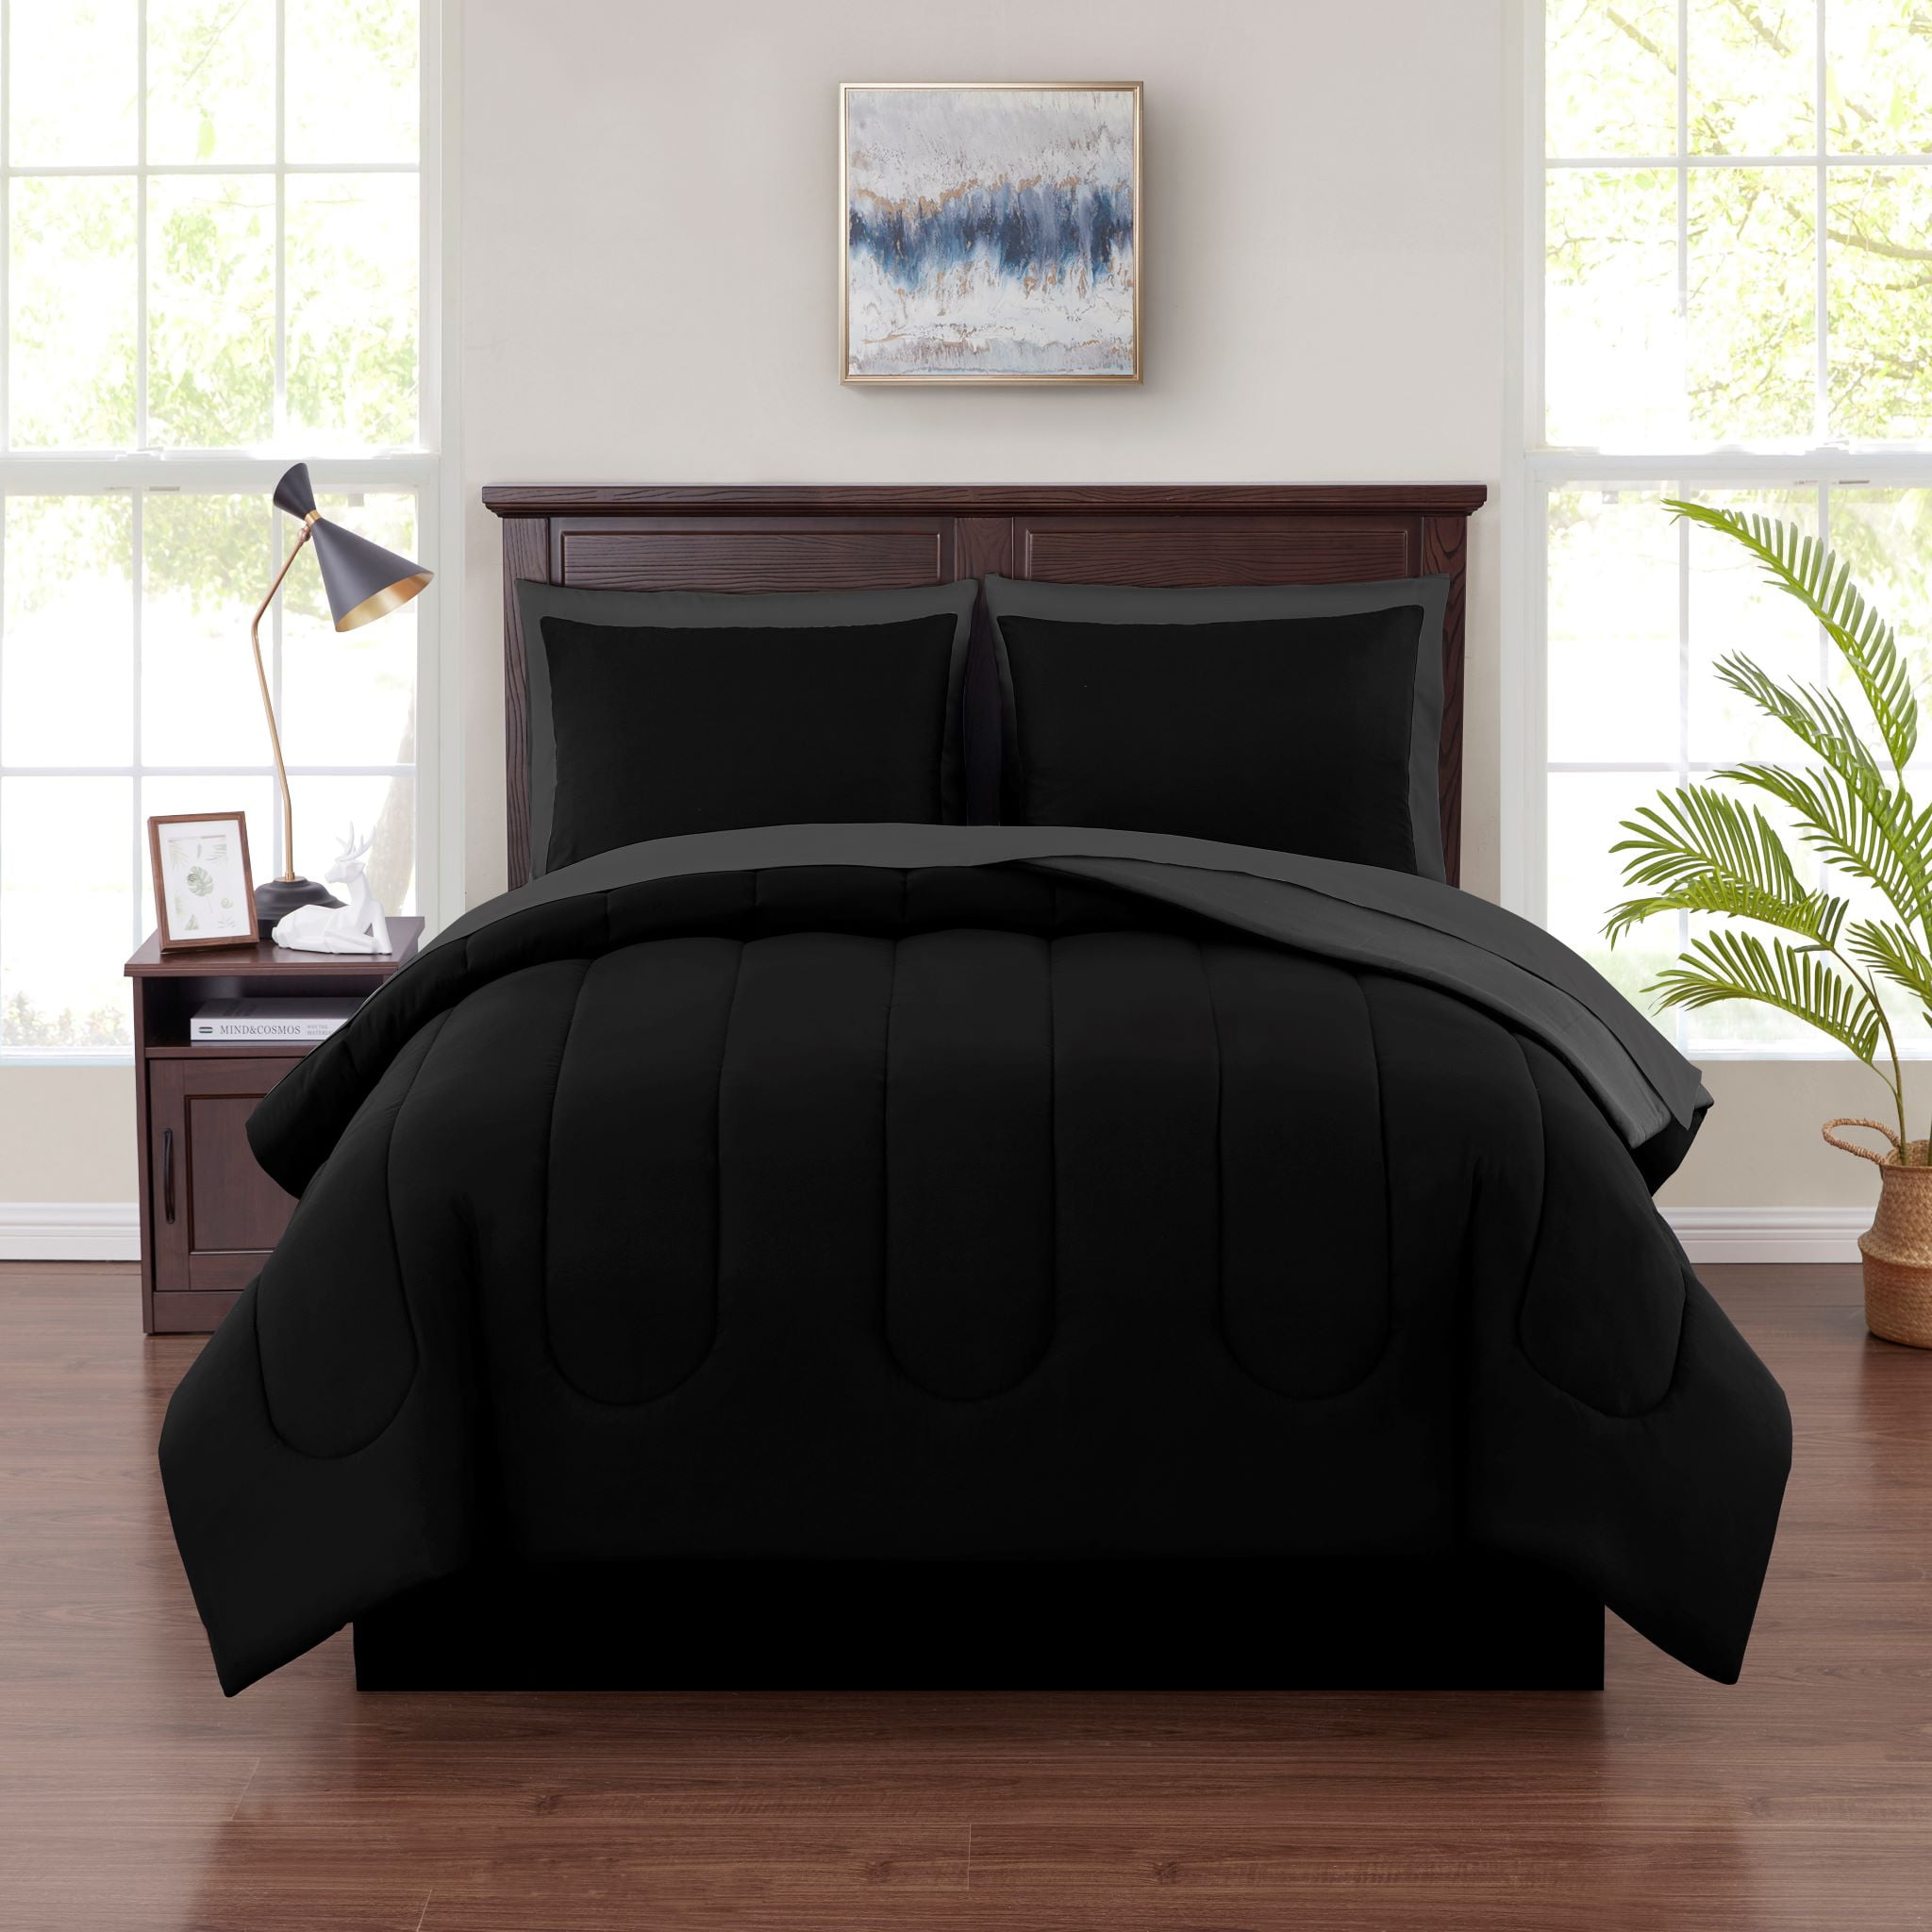 Mainstays Black 7 Piece Bed in a Bag Comforter Set with Sheets, Queen ...